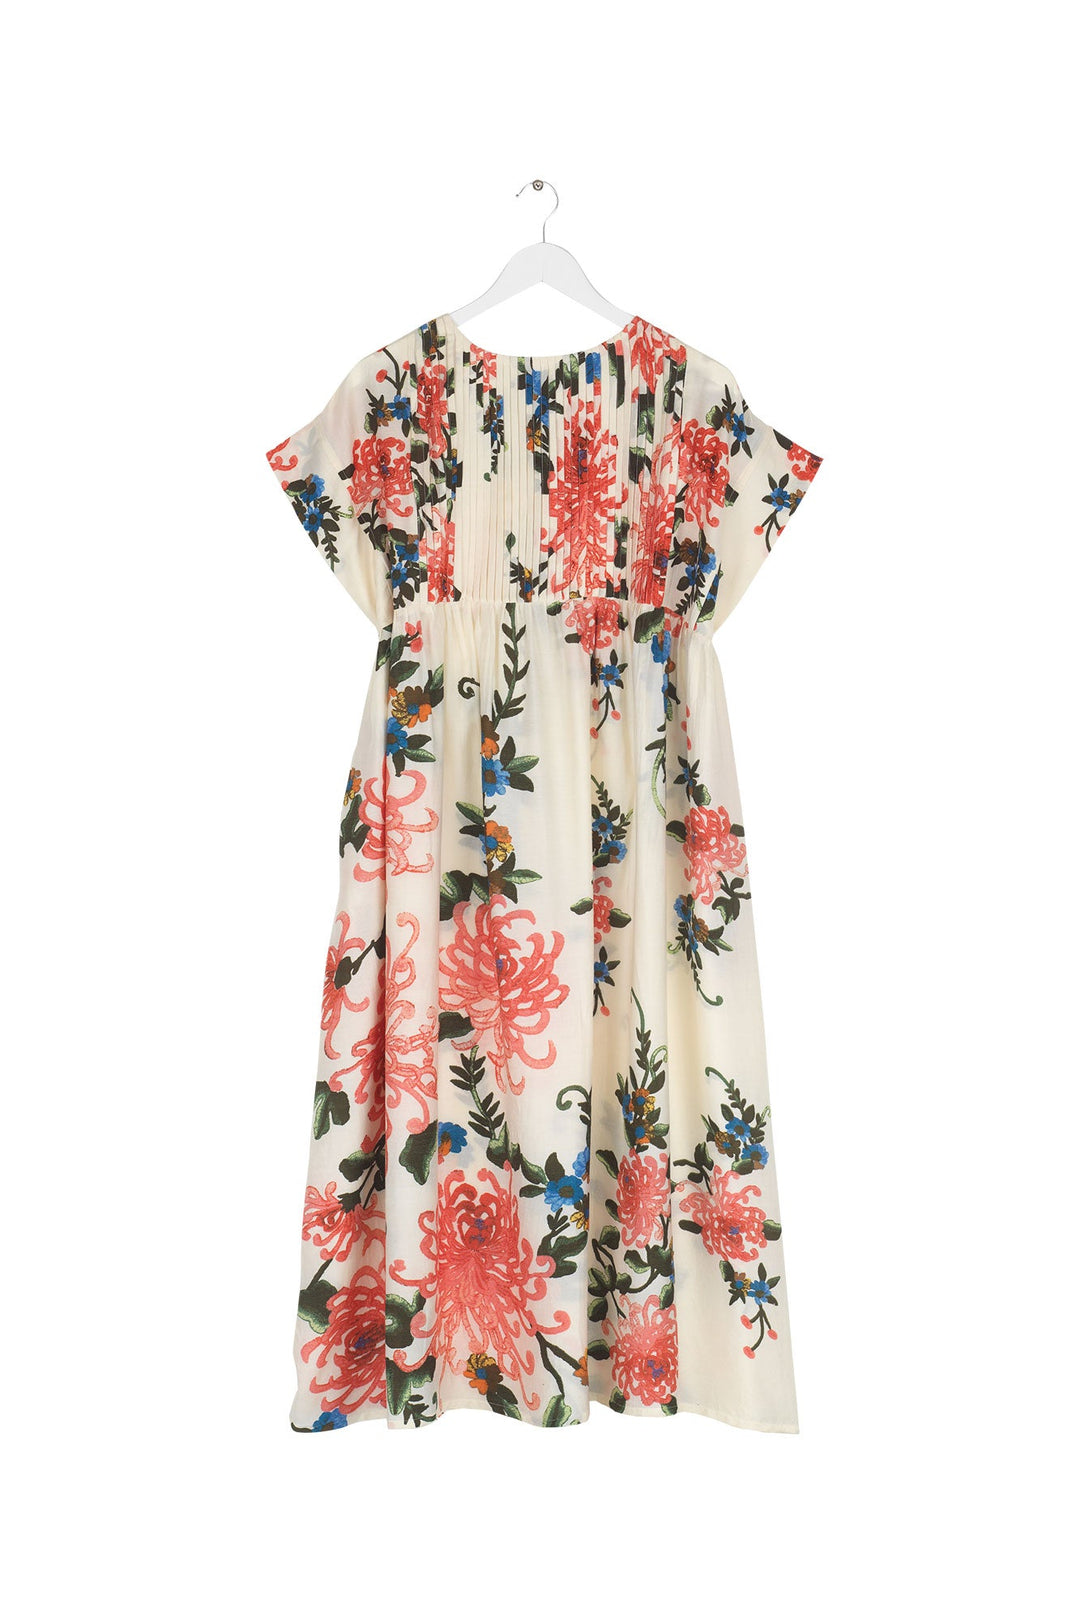 Women's short sleeve pleated dress in ecru with chrysanthemum print by One Hundred Stars